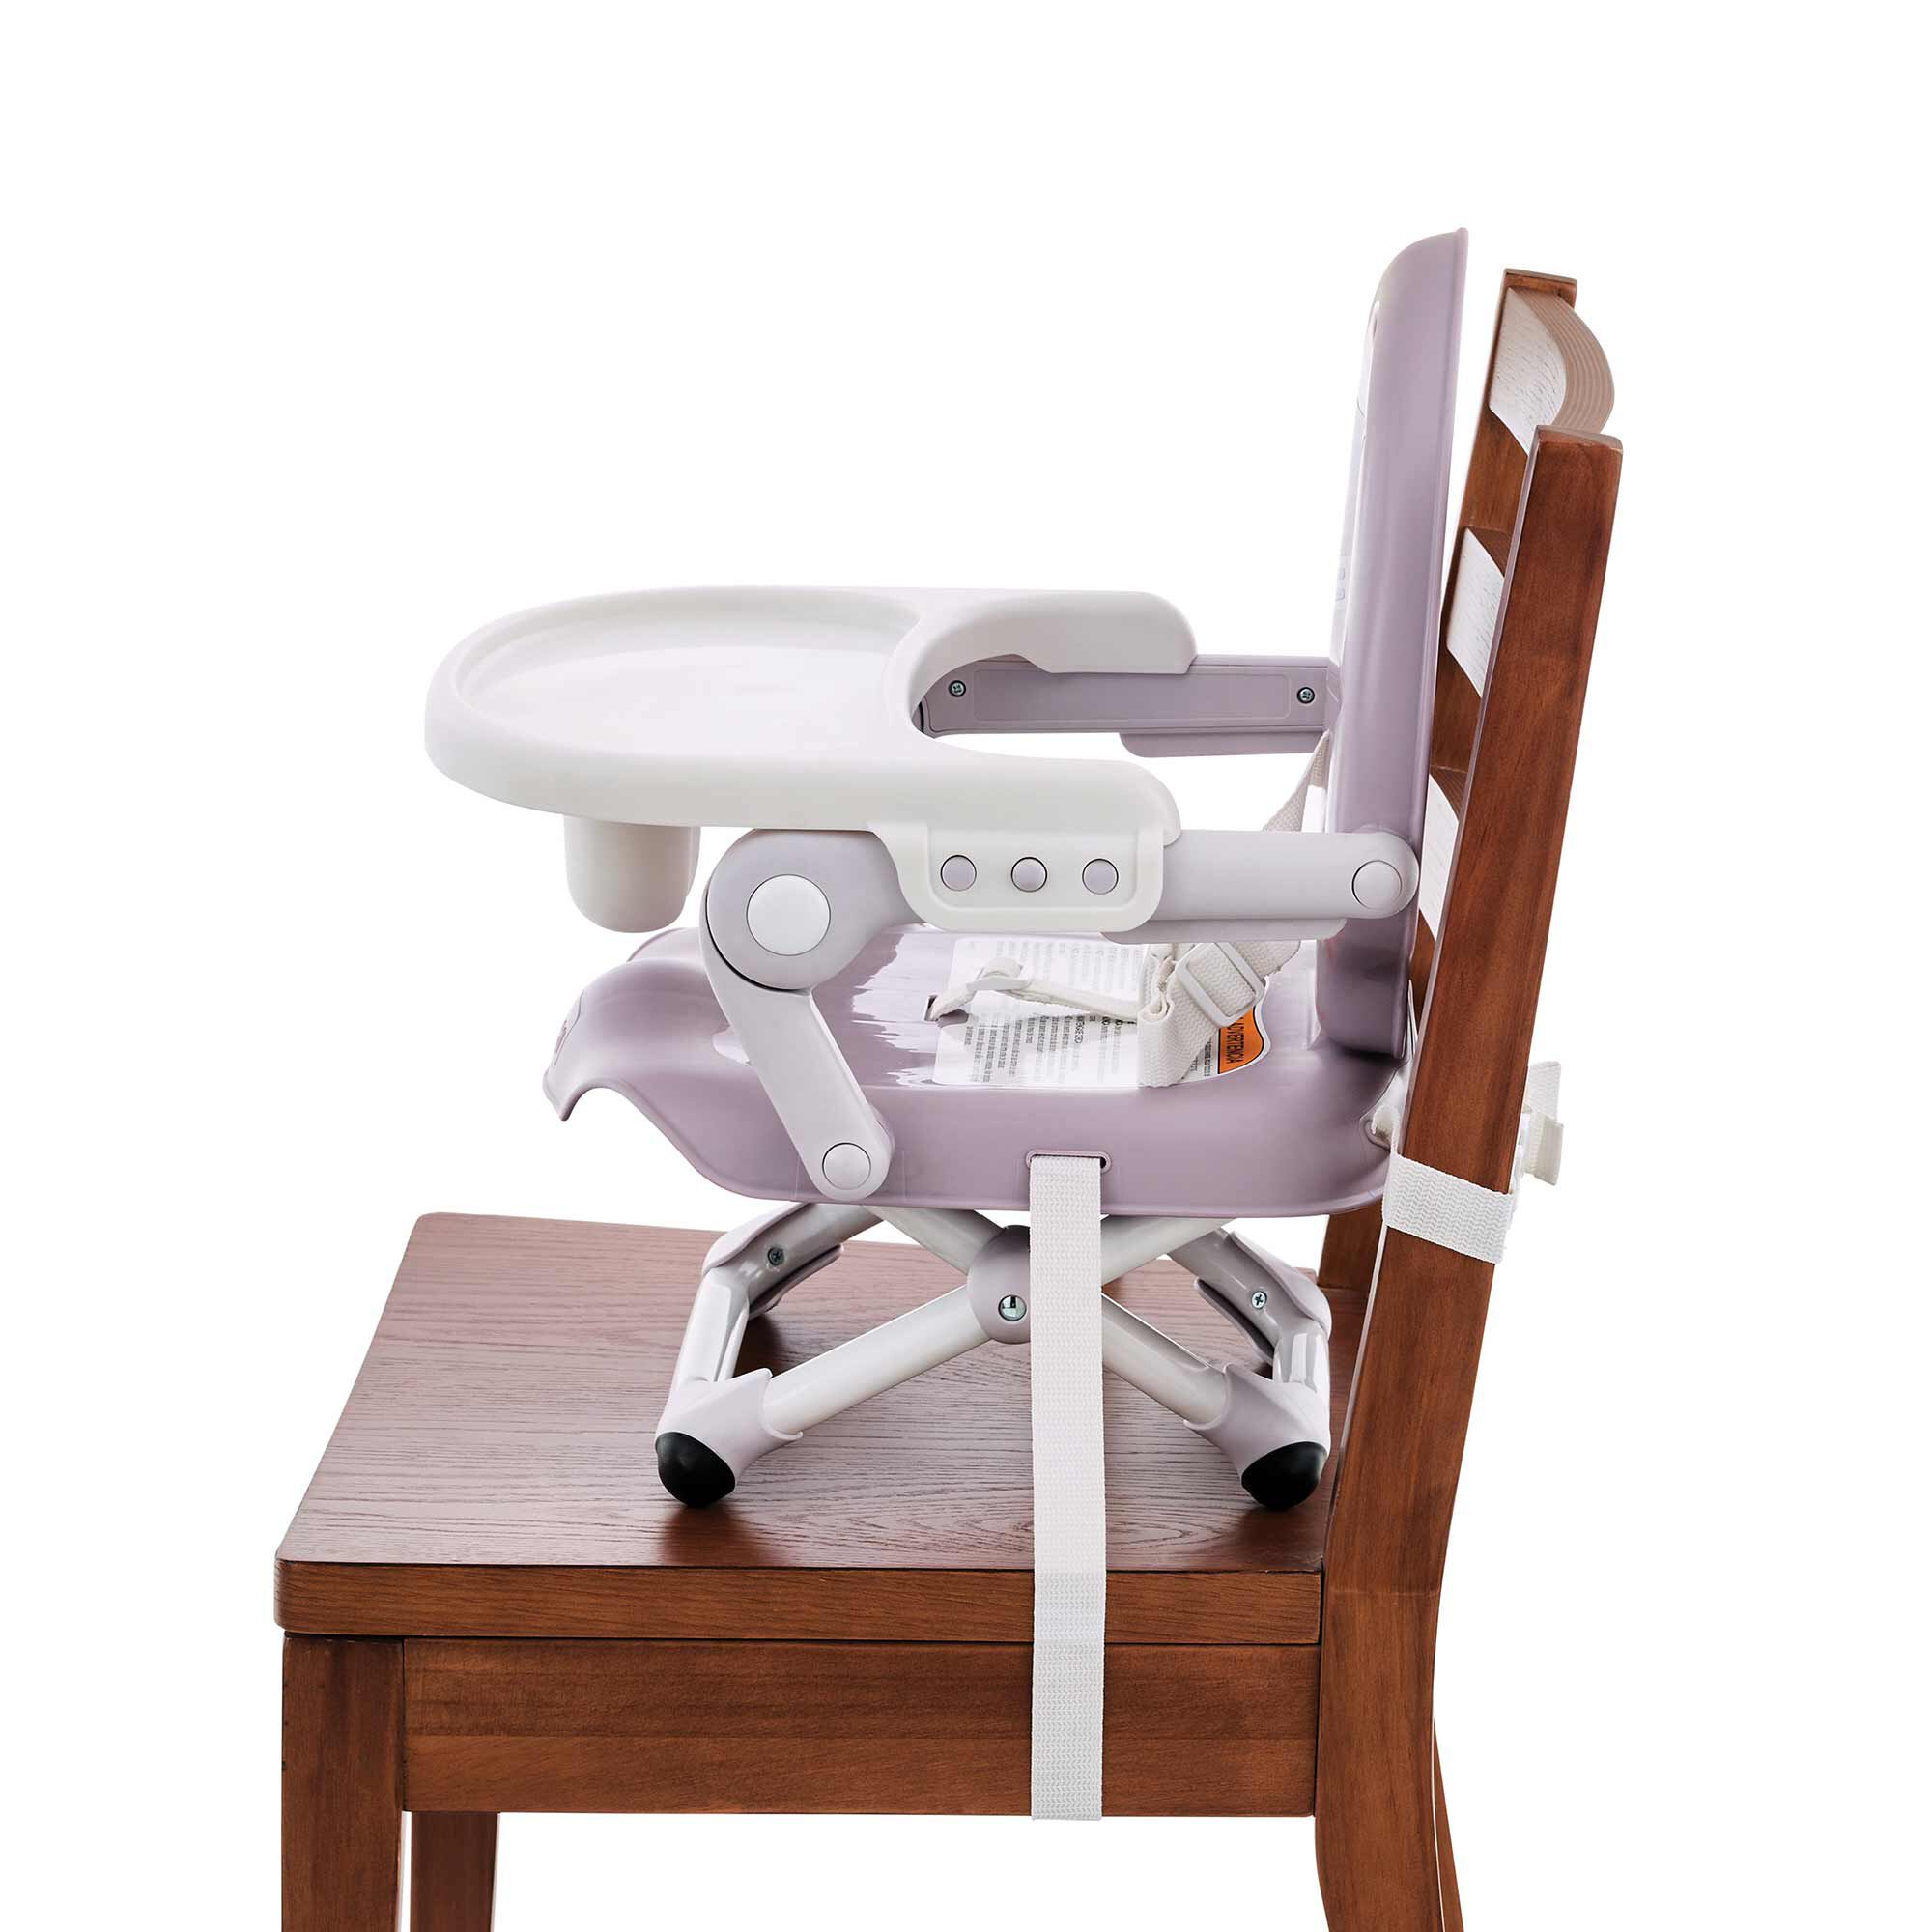 https://www.chiccousa.com/dw/image/v2/AAMT_PRD/on/demandware.static/-/Sites-chicco_catalog/default/dw757493bc/images/products/Gear/pocket-snack/chicco-pocket-snack-booster-seat-lavender-Left.jpg?sw=2000&sh=2000&sm=fit